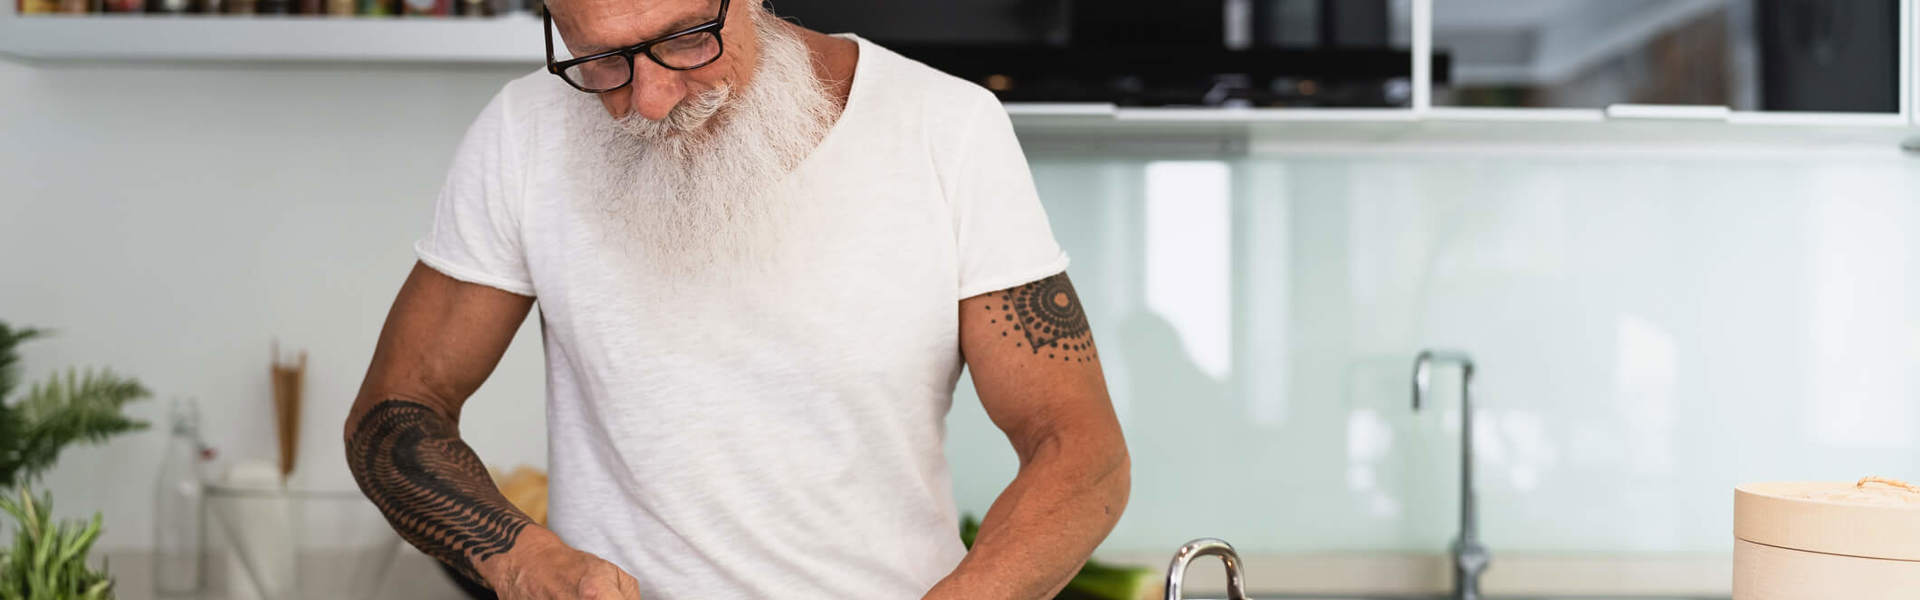 a man with a beard and glasses in a white t-shirt slicing courgette in a kitchen